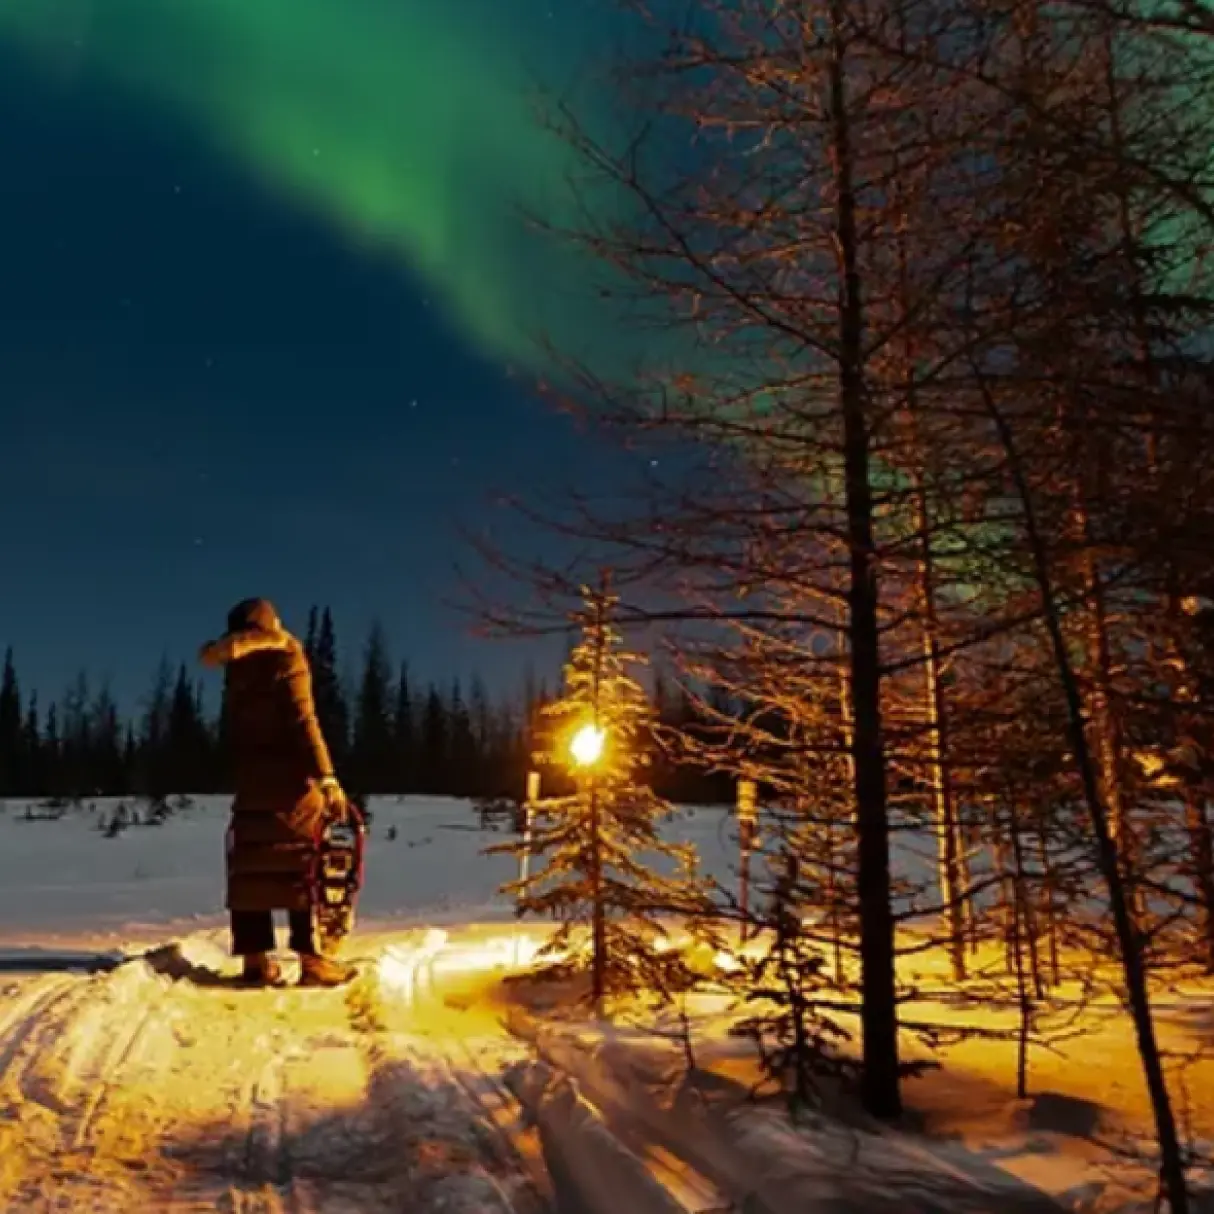 A person wearing a large coat holds a lantern as they look up at green northern lights in the night sky.